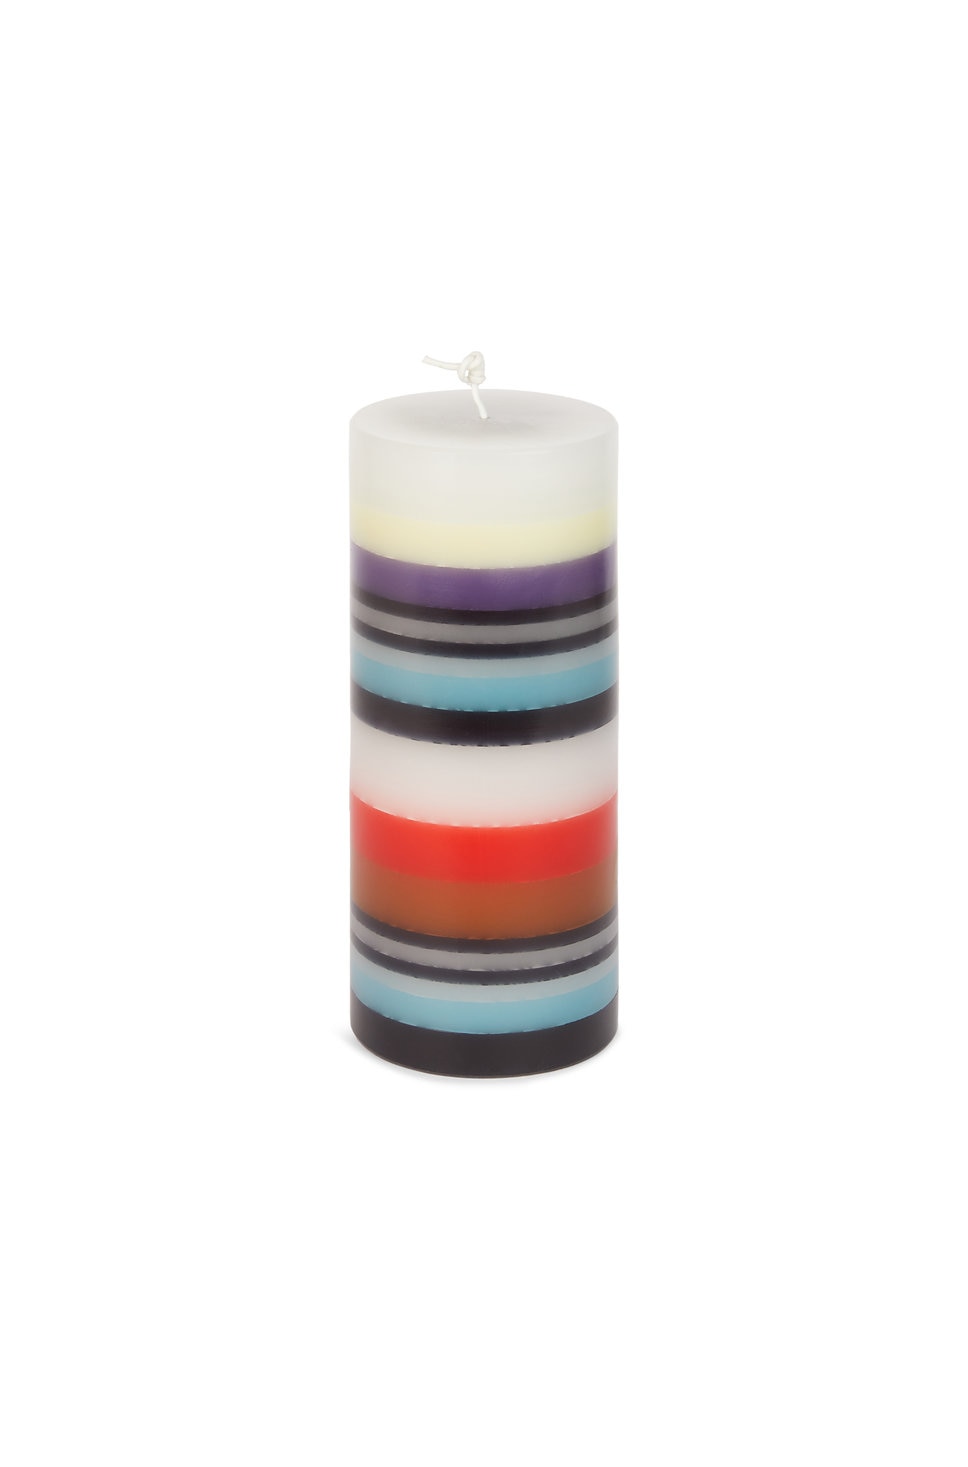 Totem candle 9x24 cm, Red  - 8051275649229 - 1